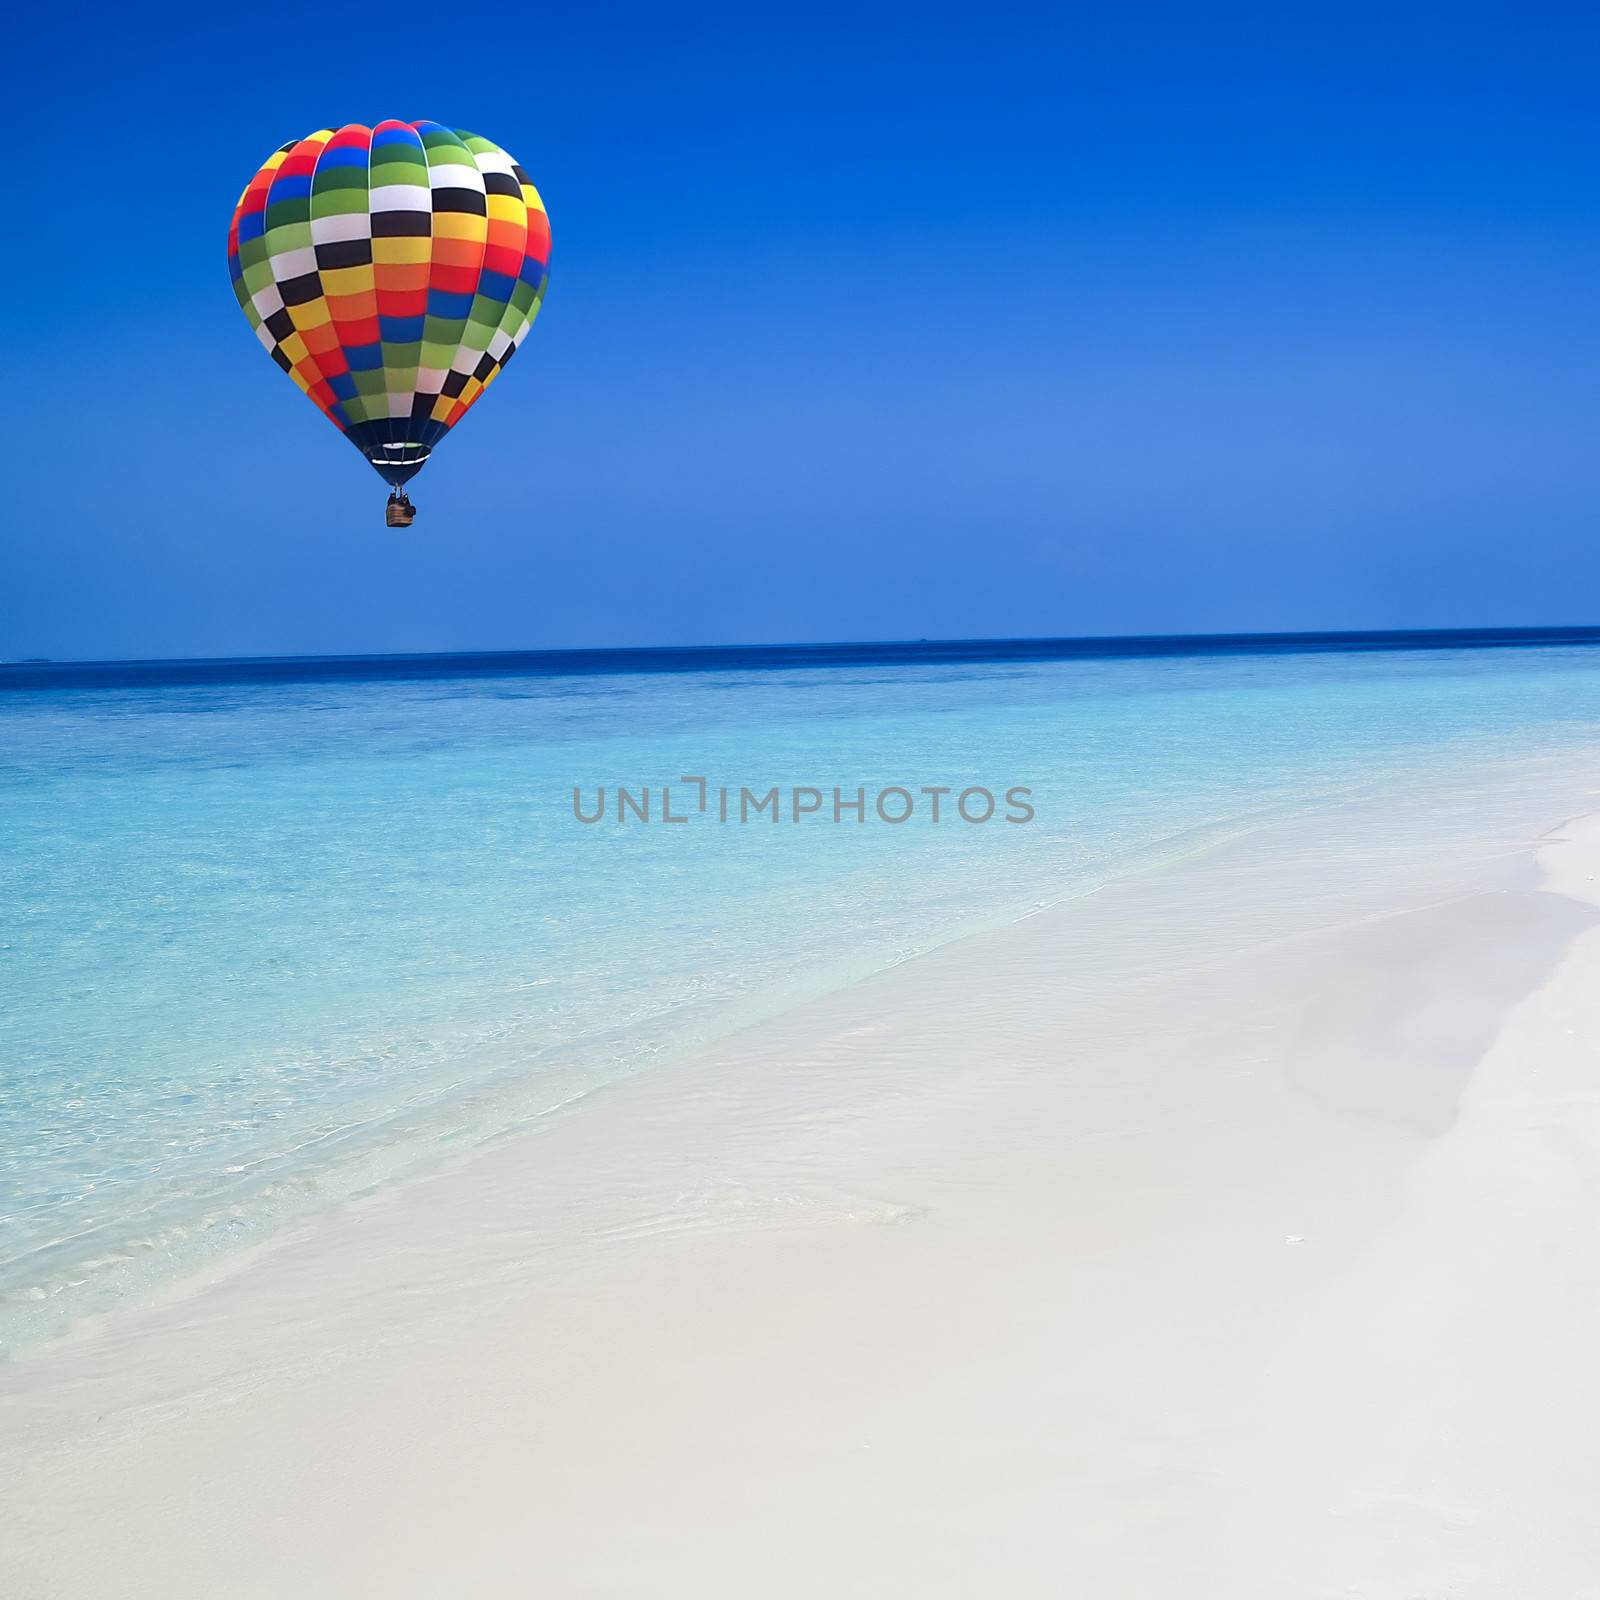 Colorful hot air balloon fly over the blue sea